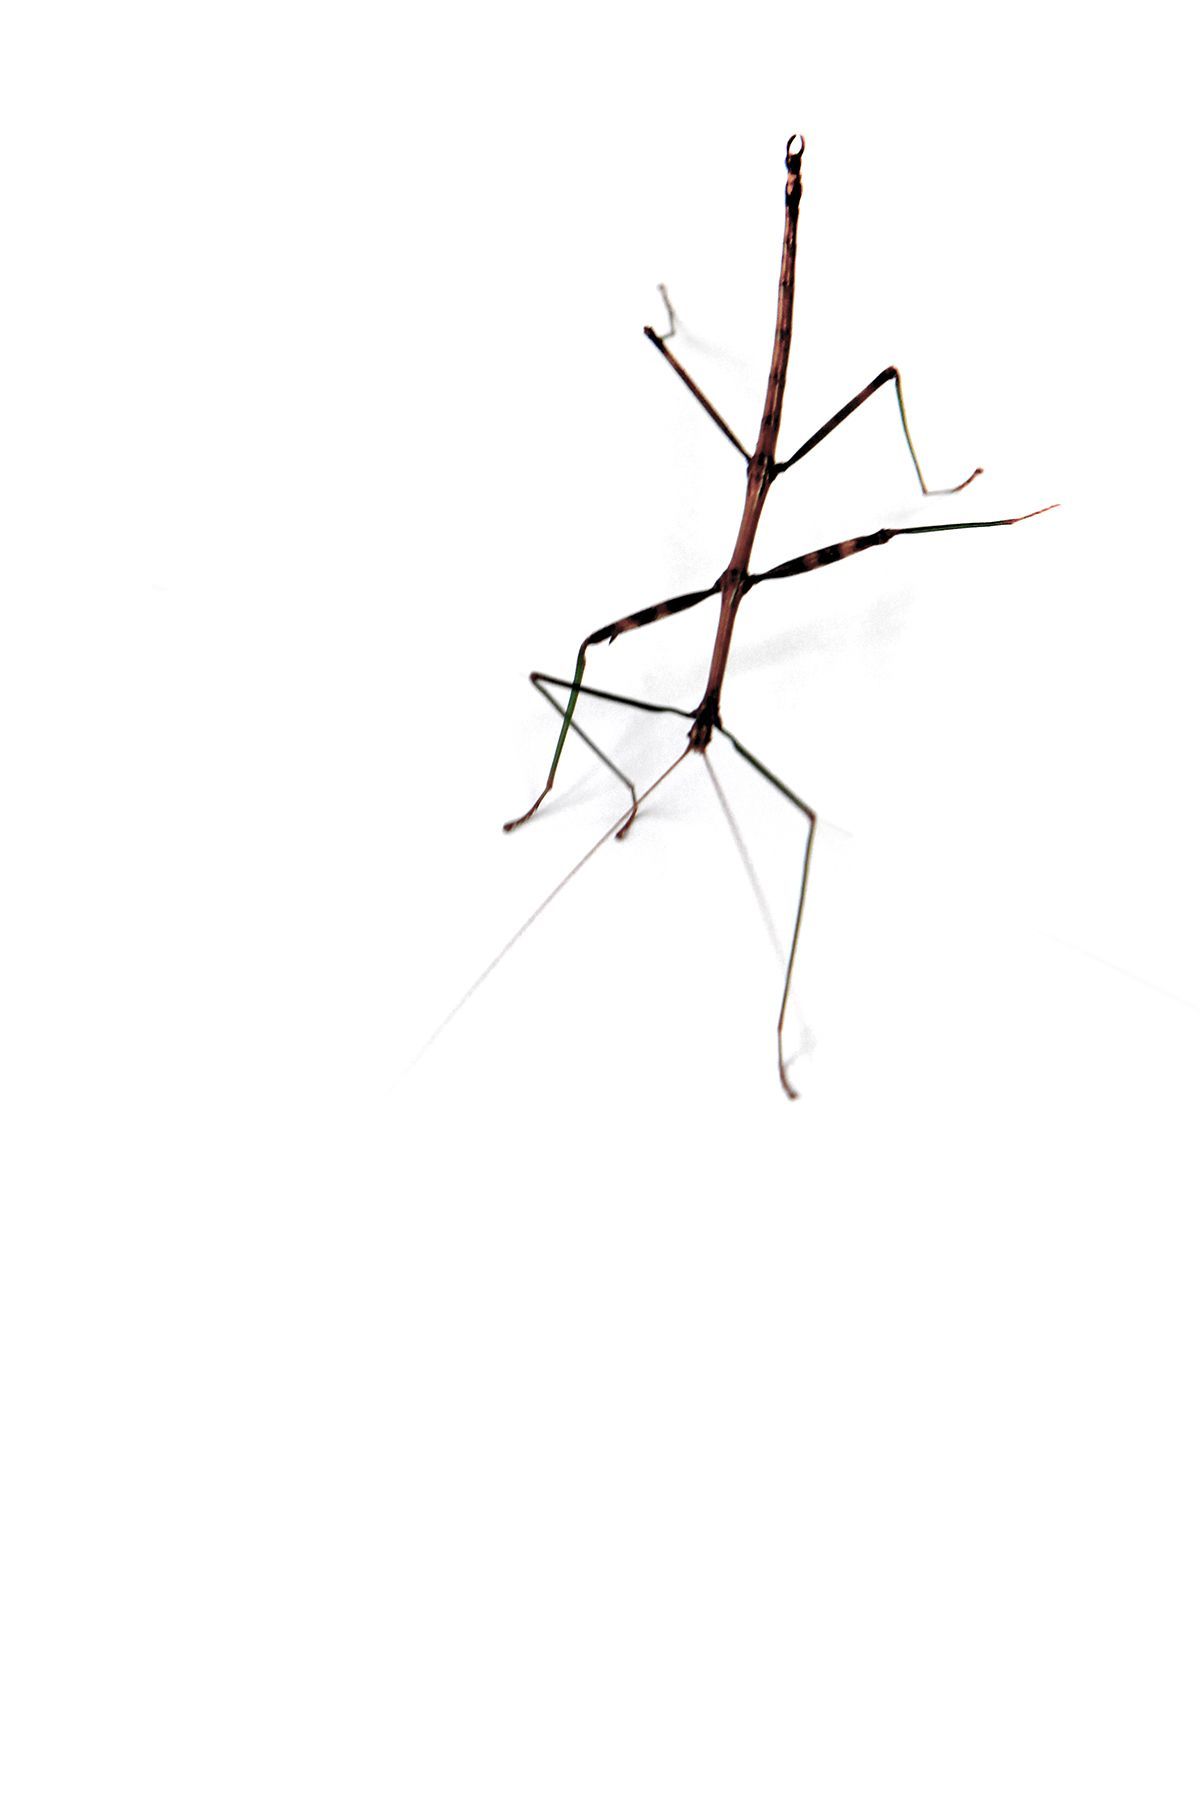 Stick bugs can destroy crops. Growers have to protect their plants from insects.com. Walking stick bug, Stick bug, Bugs and insects